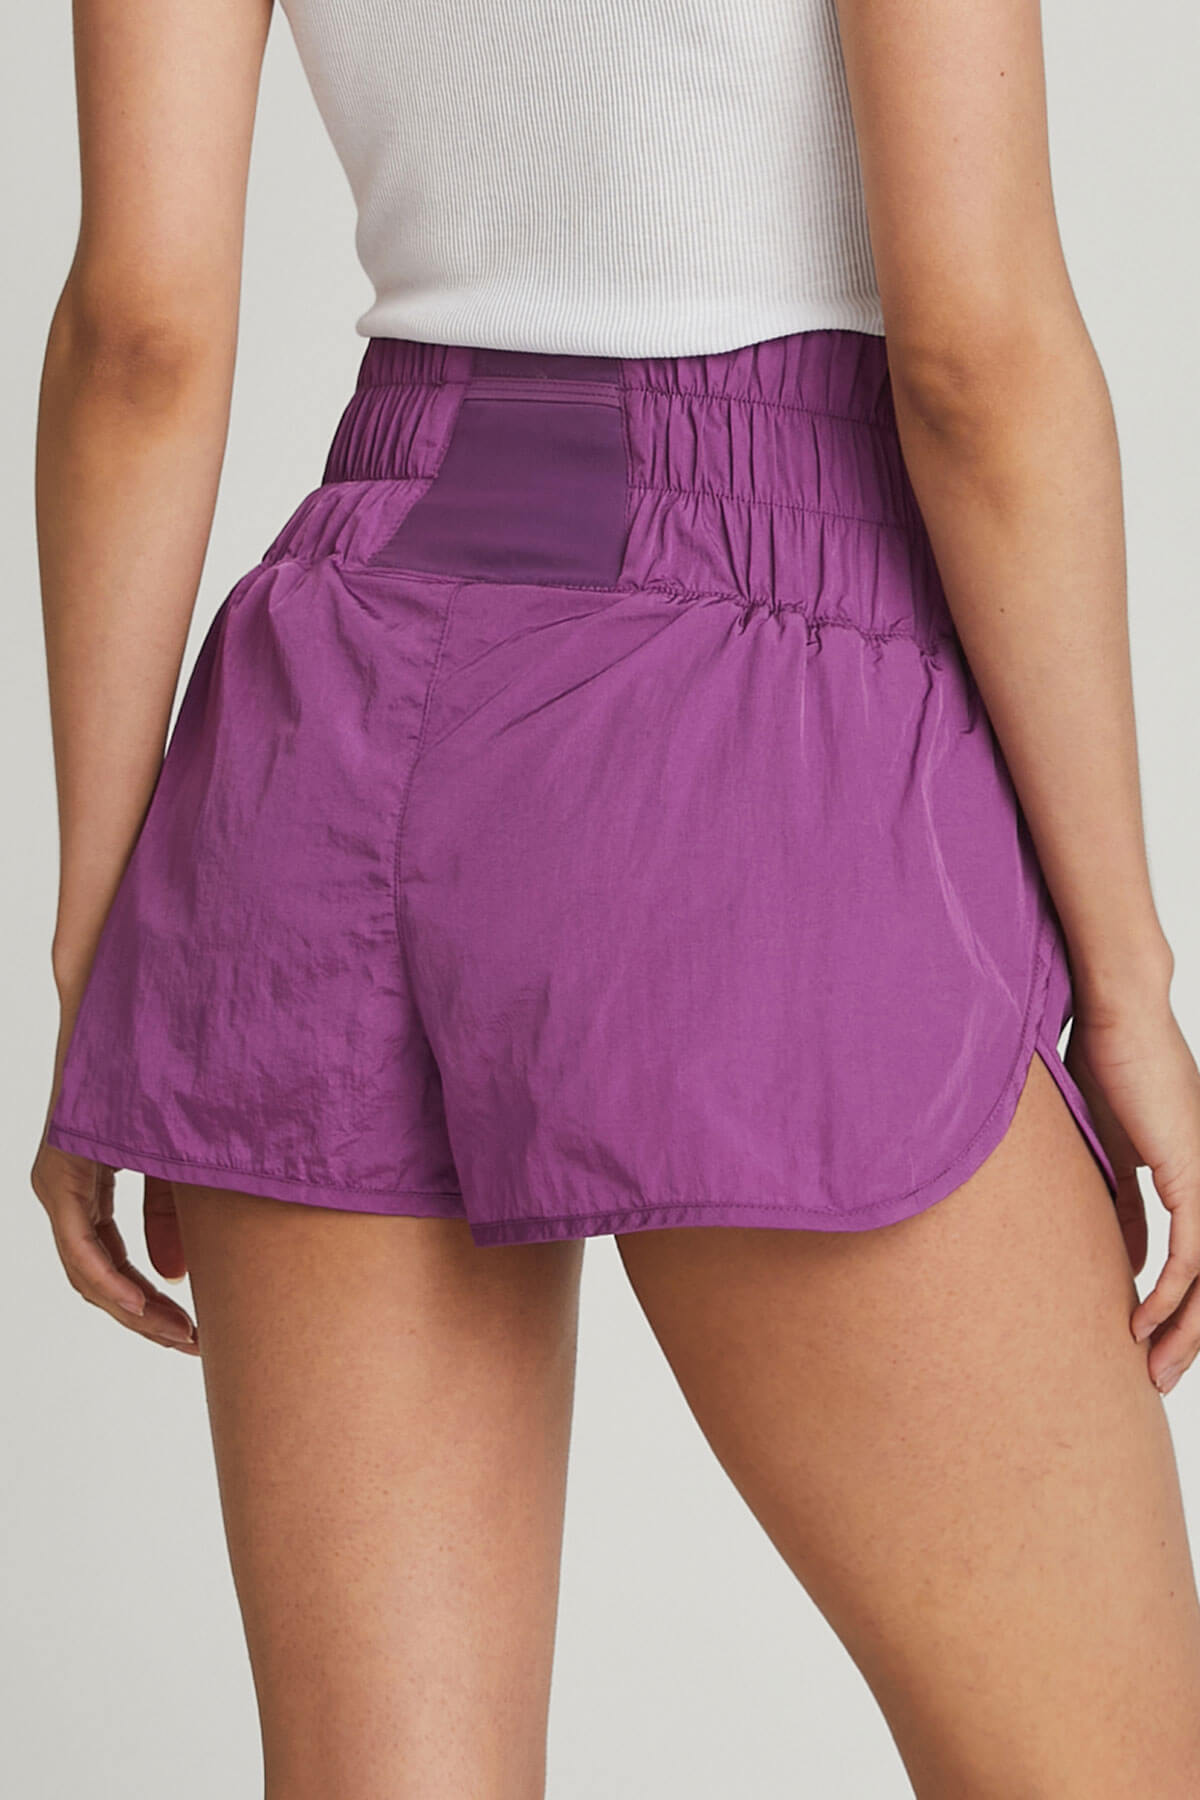 Short Shorts: FP Movement Prajna Lo Shorts, These Are Free People's  Bestselling Workout Shorts